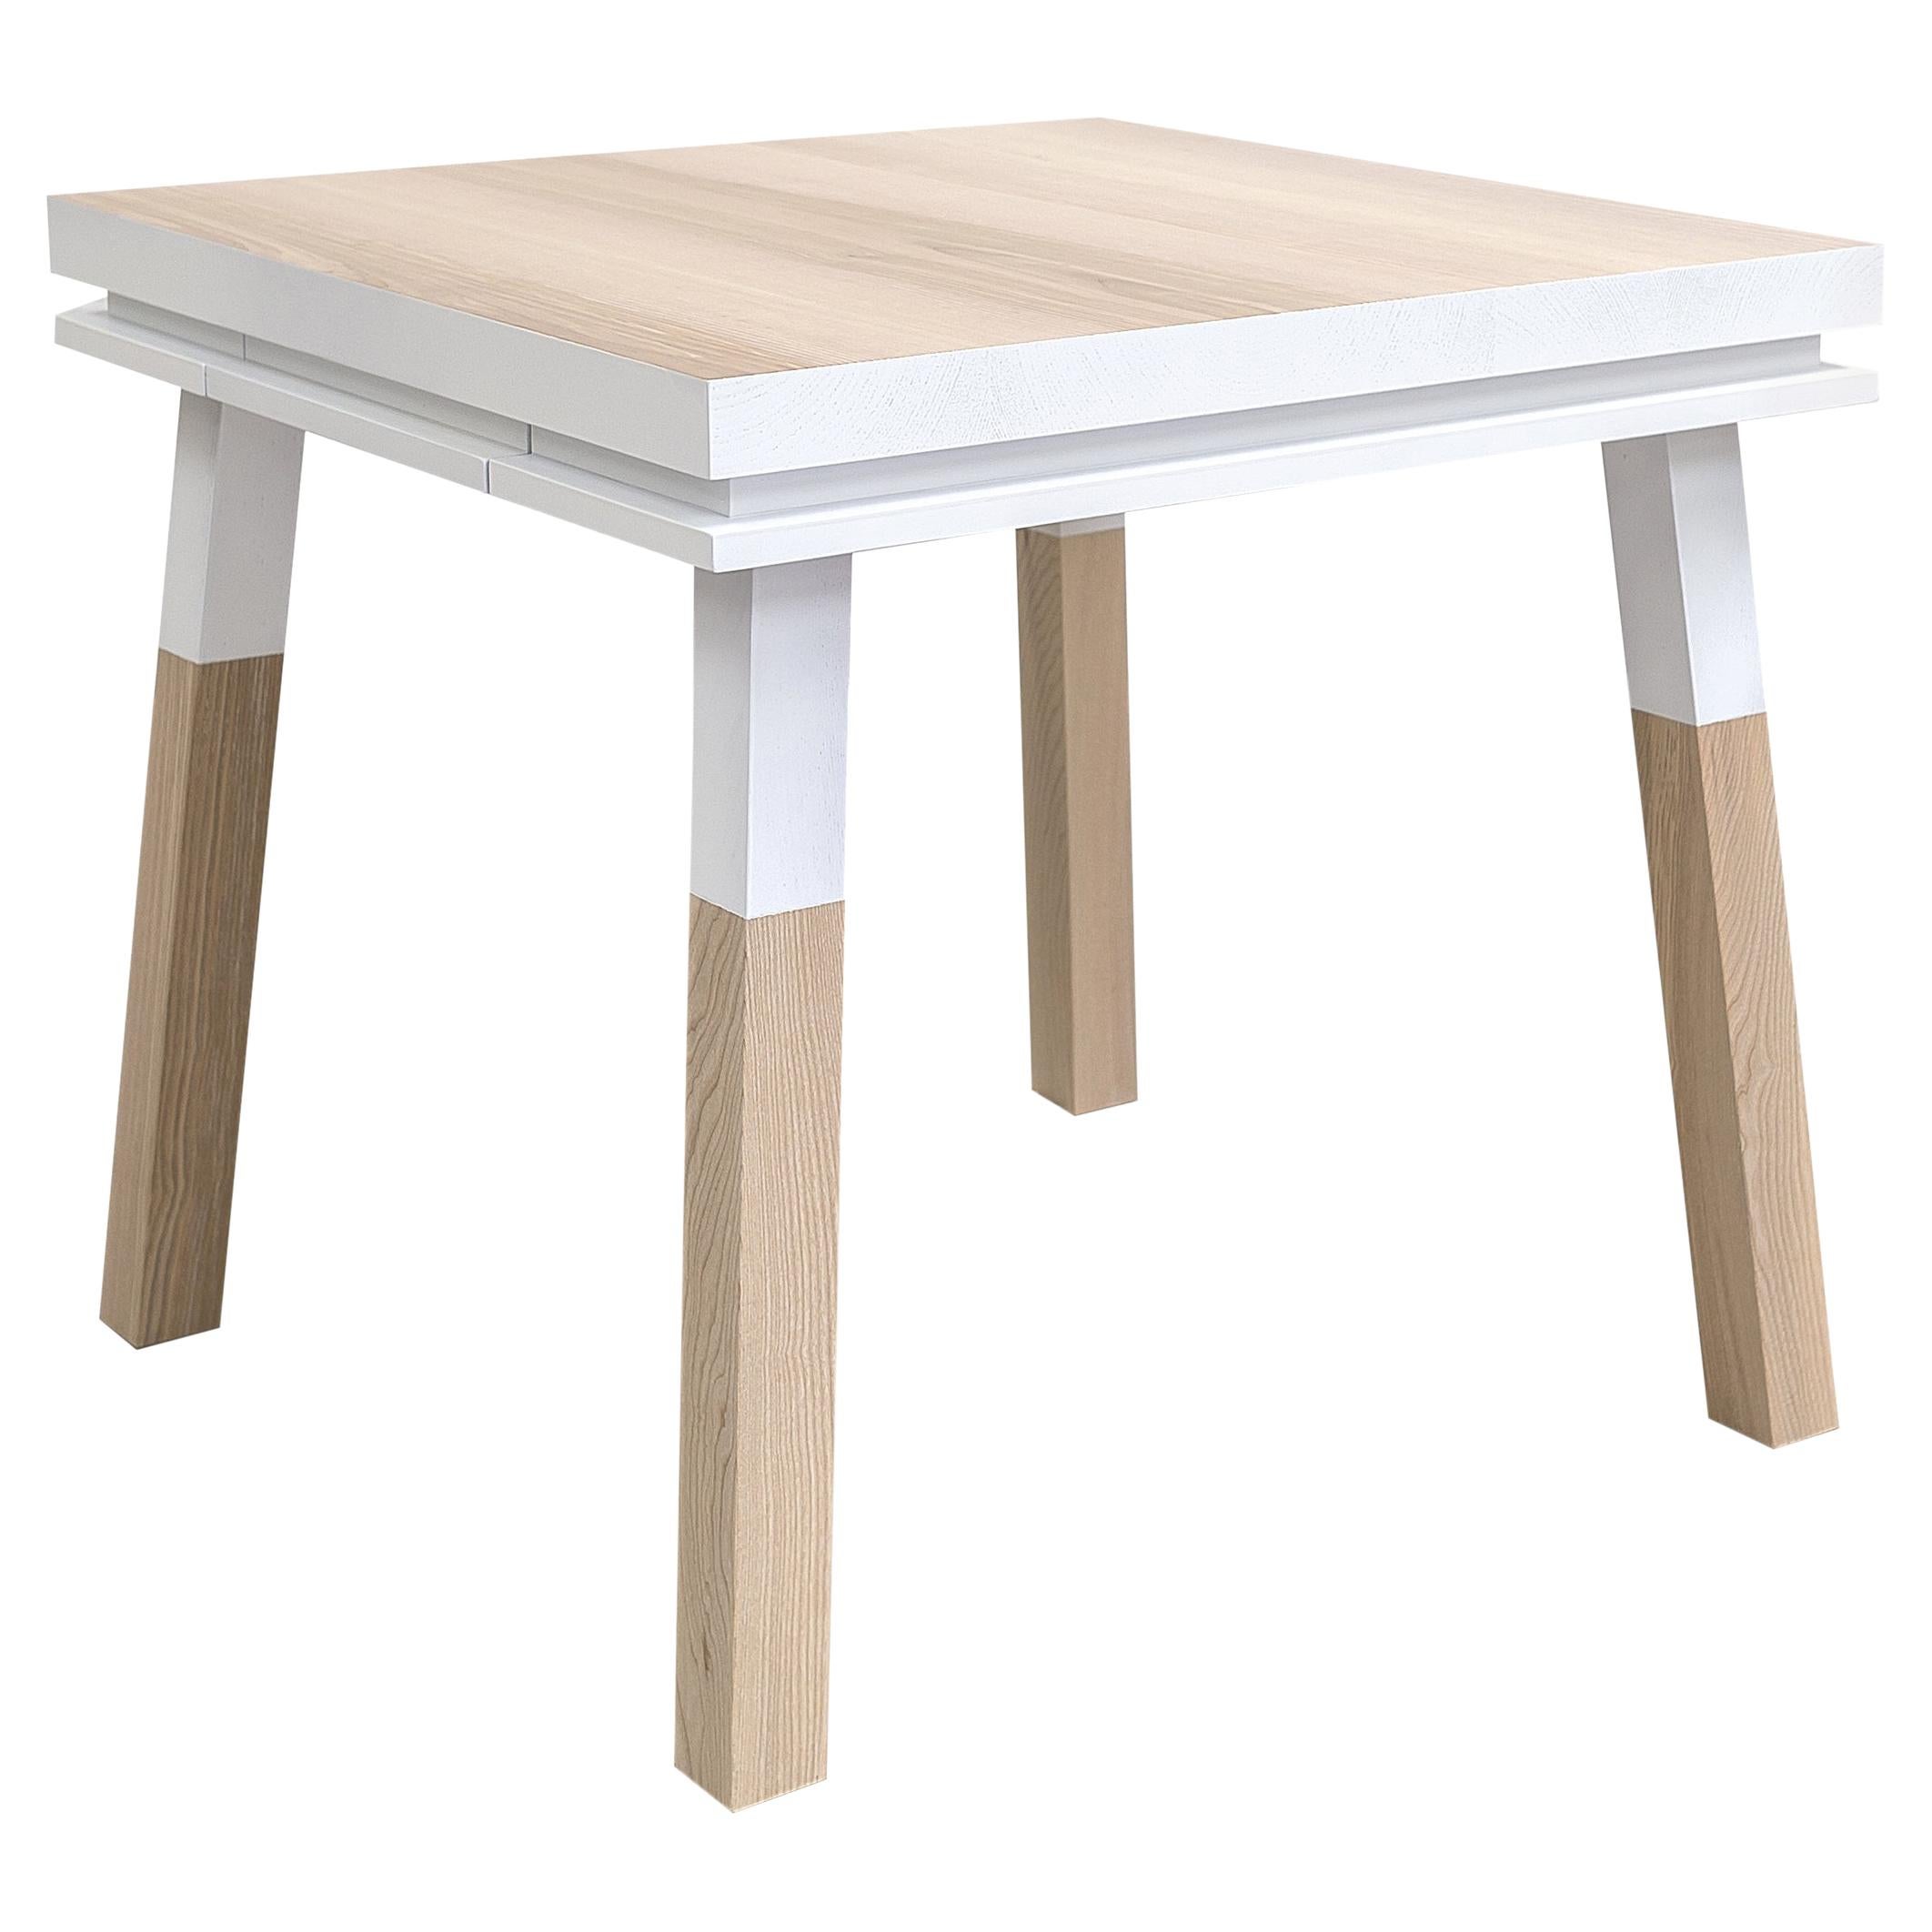 White Square Desk in Ash Wood Designed by Eric Gizard, 100% Made in France